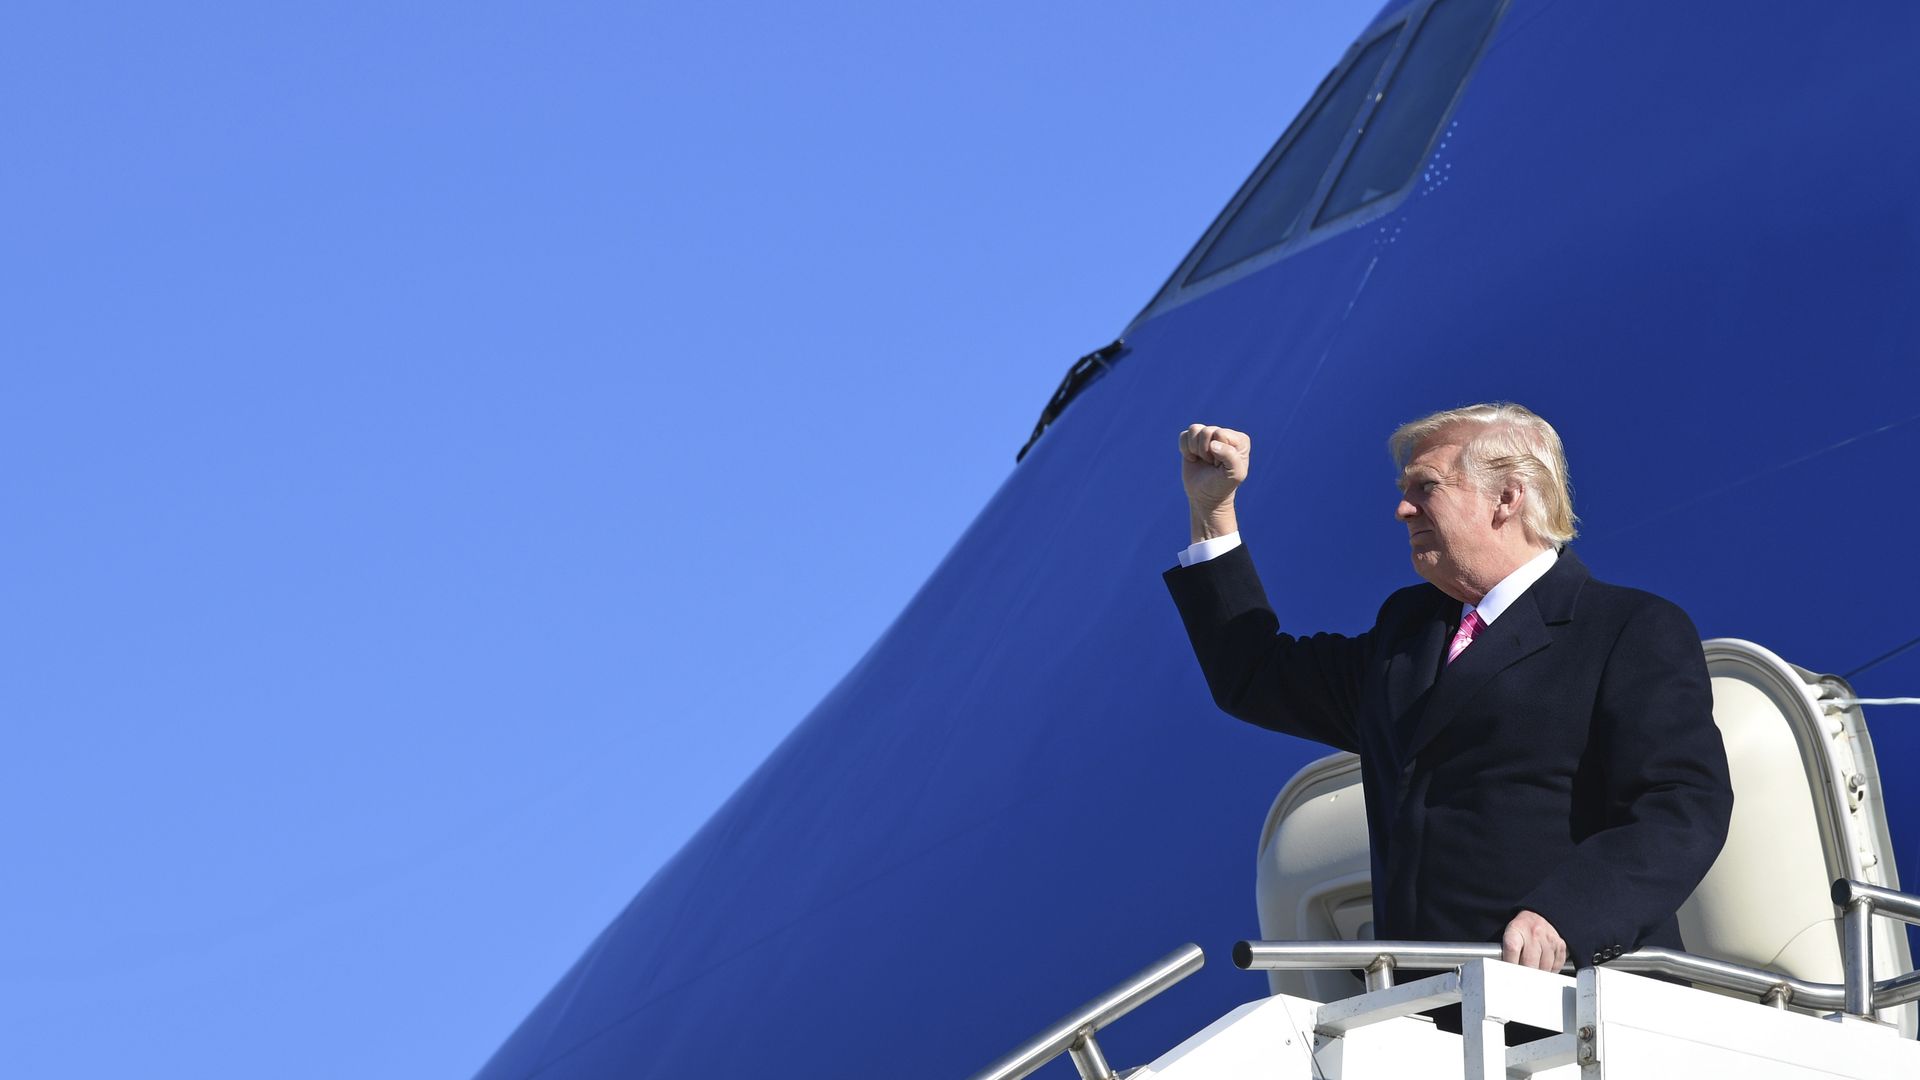 President Donald Trump gestures as he walks down the steps of Air Force One.